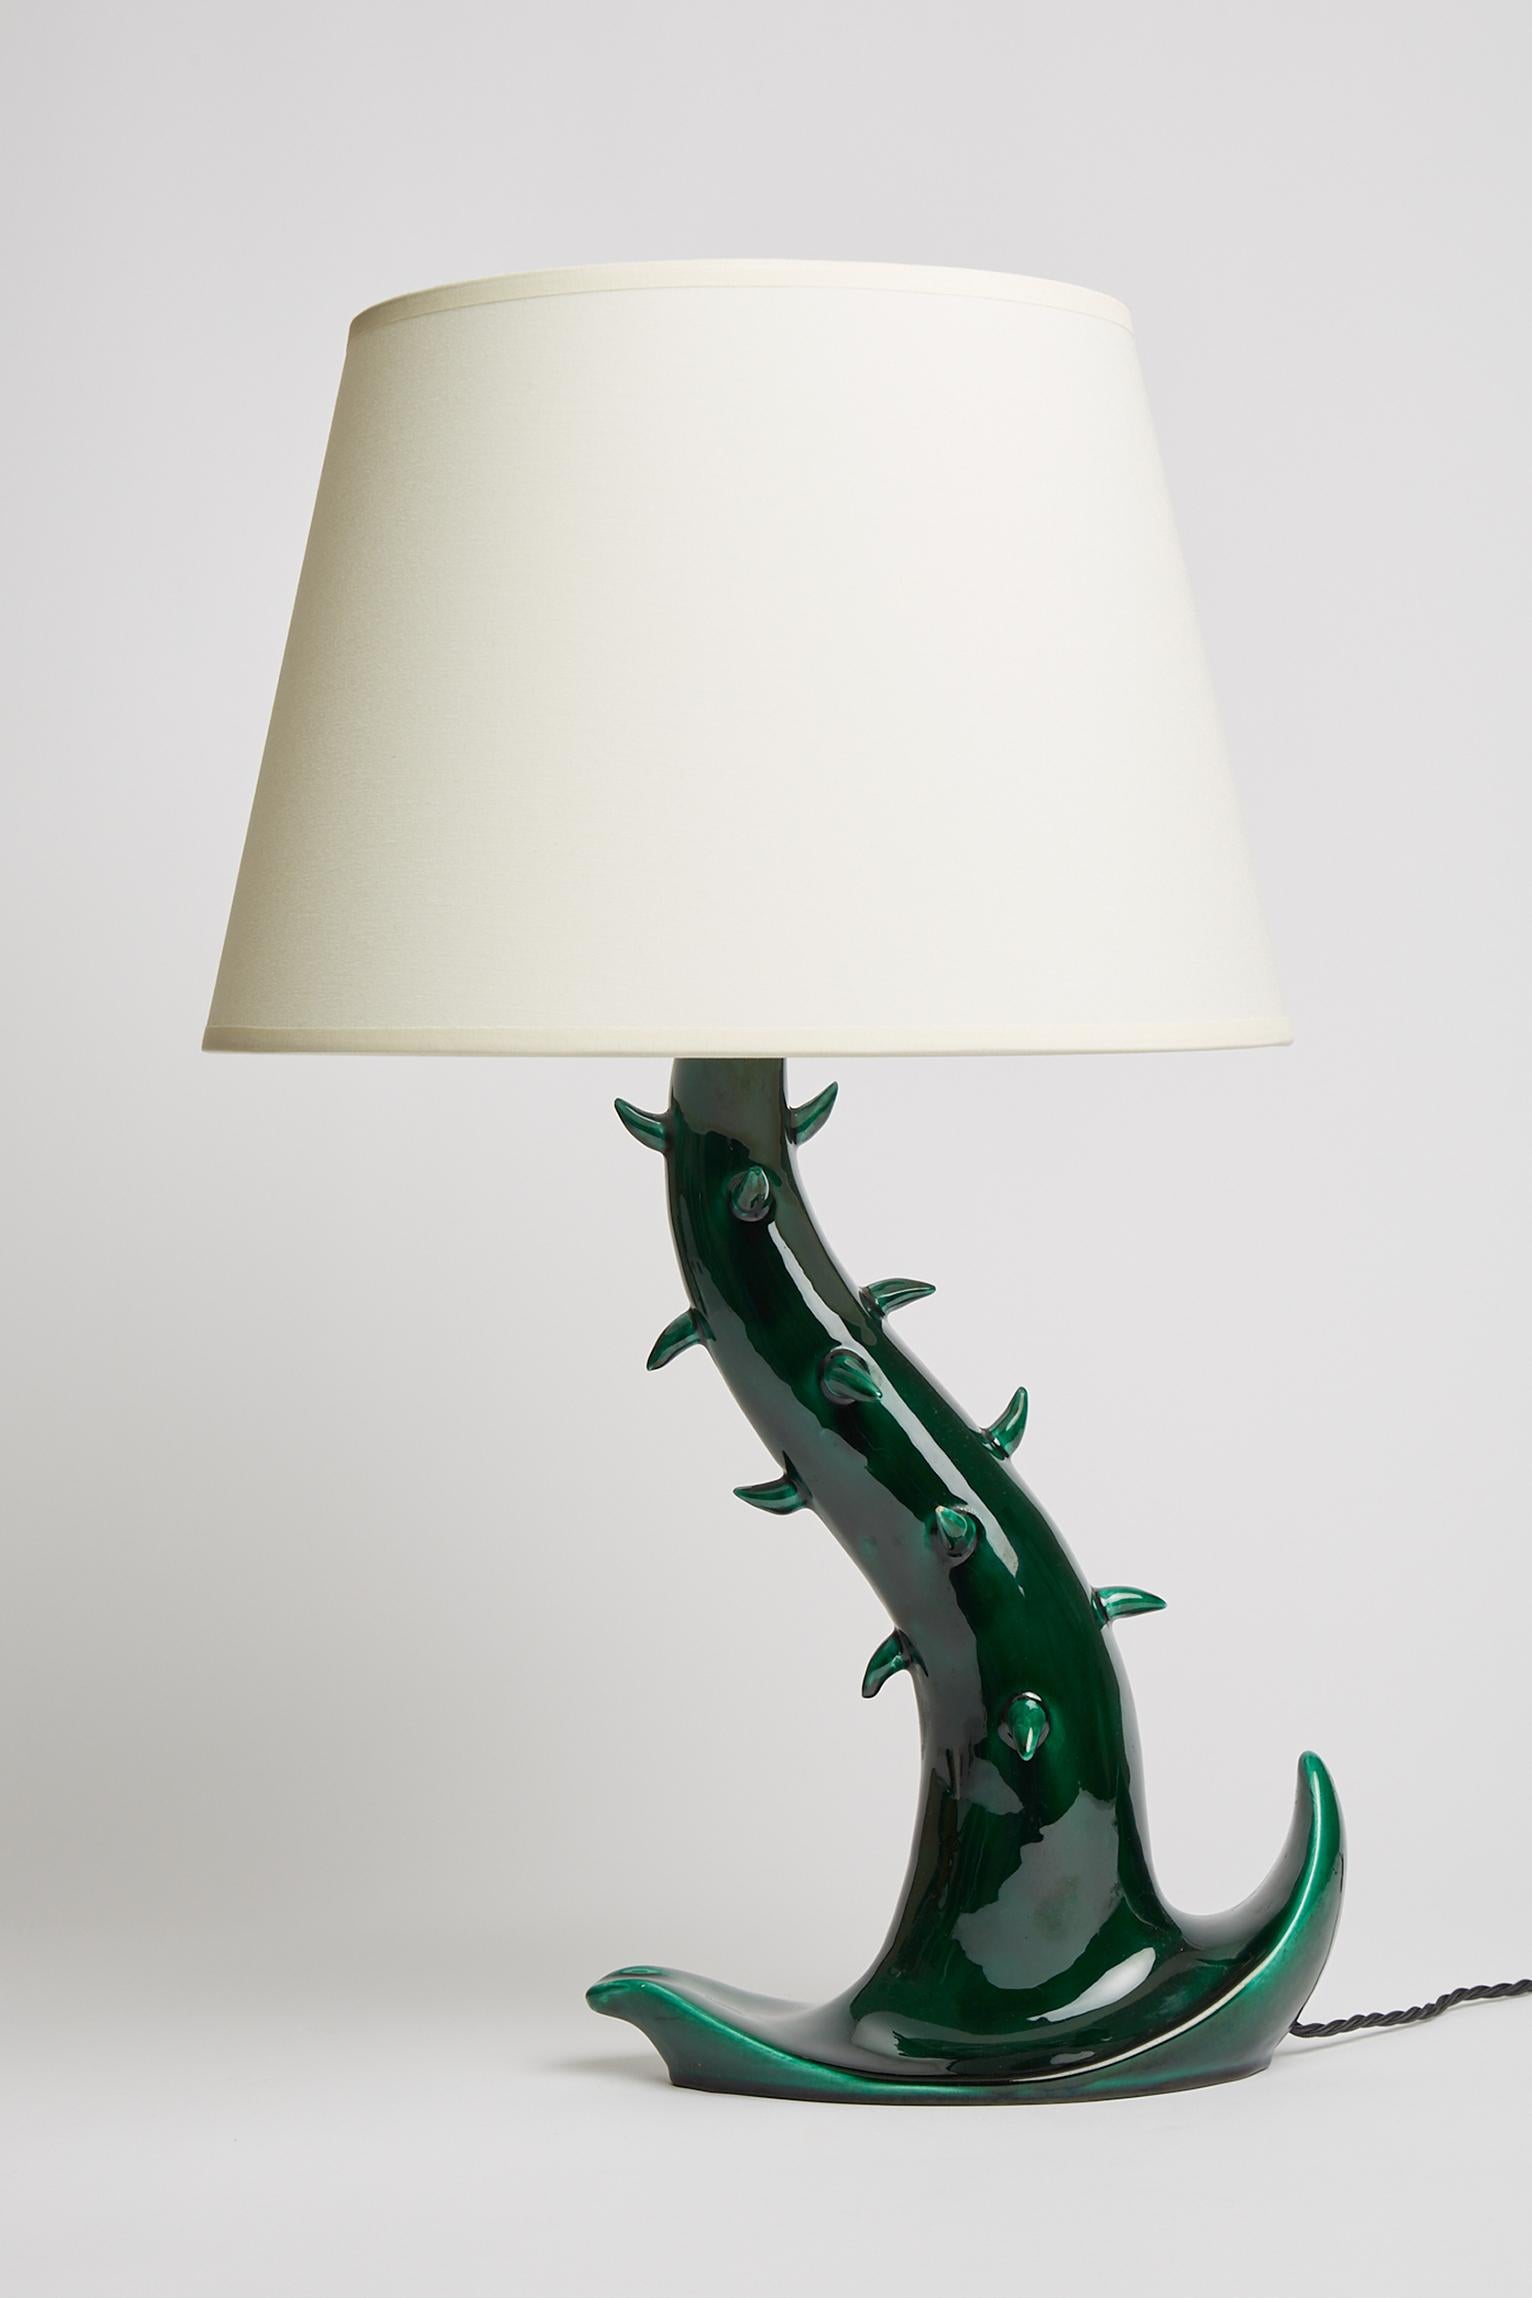 A deep green glazed ceramic table lamp stylised as a free form branch with thorns. 
Stamped ‘Françoise - Calanques des Issambres’. 
France, third quarter of the 20th Century. 
With the shade: 57 cm high by 35 cm diameter.
Lamp base only: 40 cm